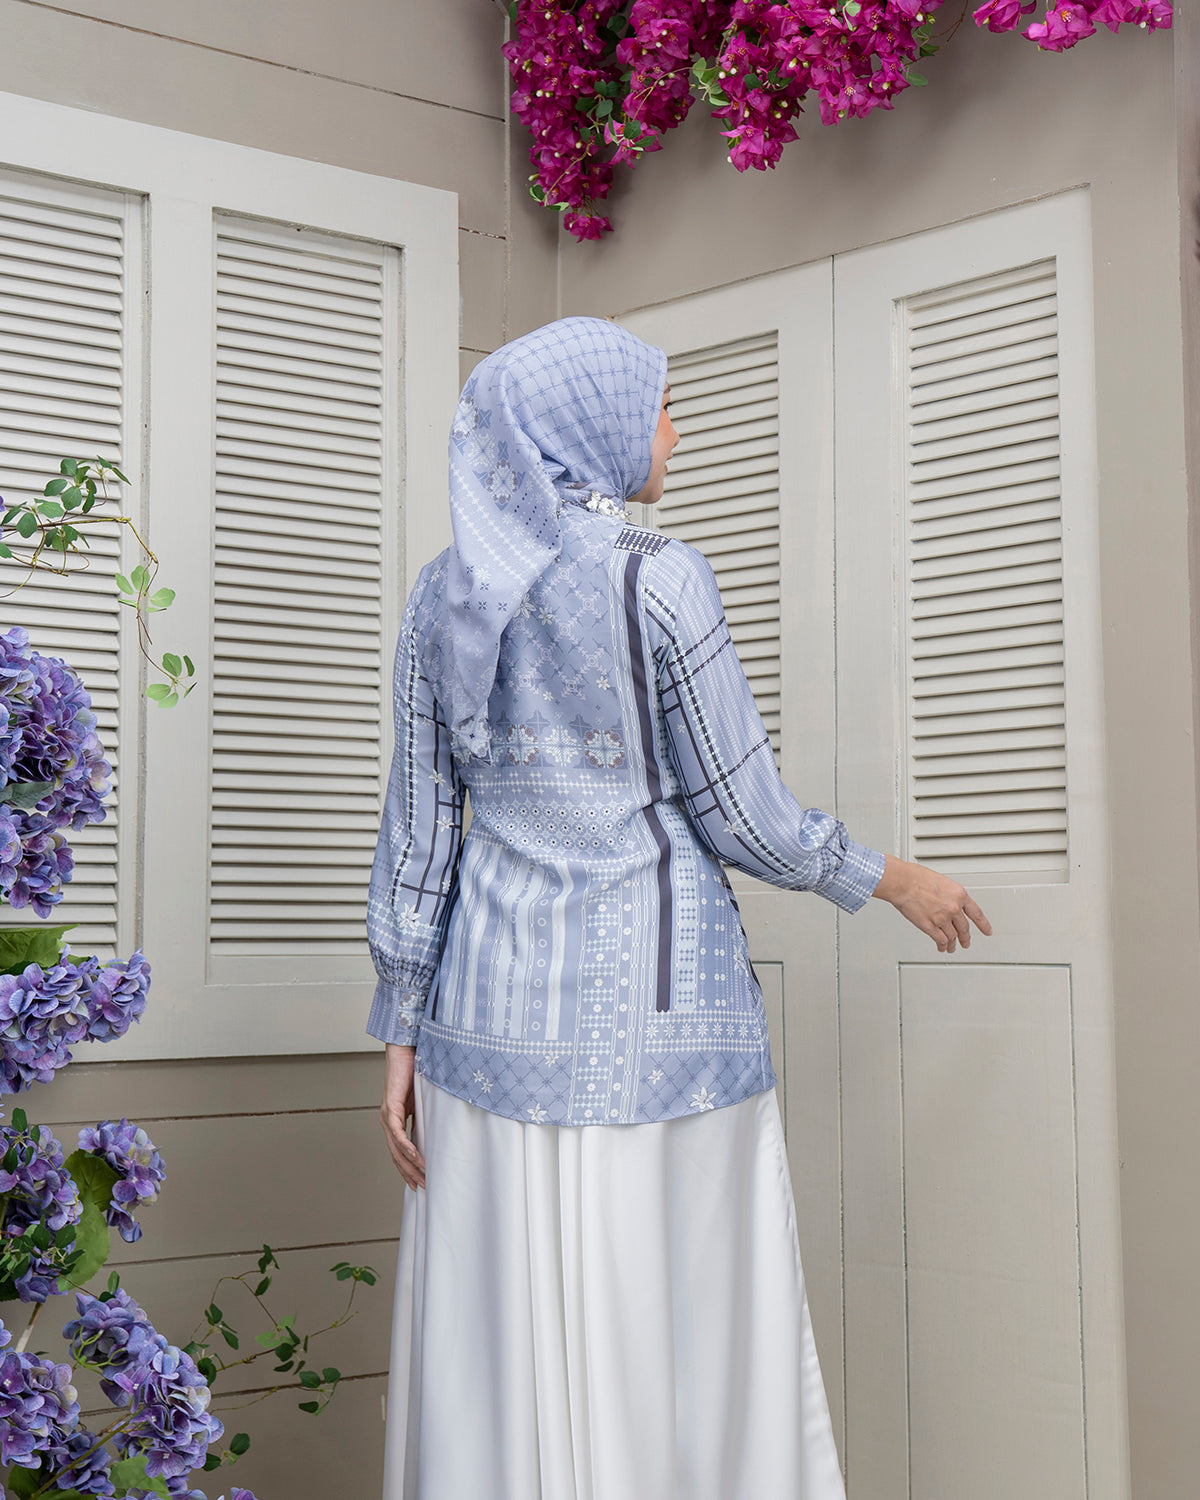 Pulang Blouse in Wisteria